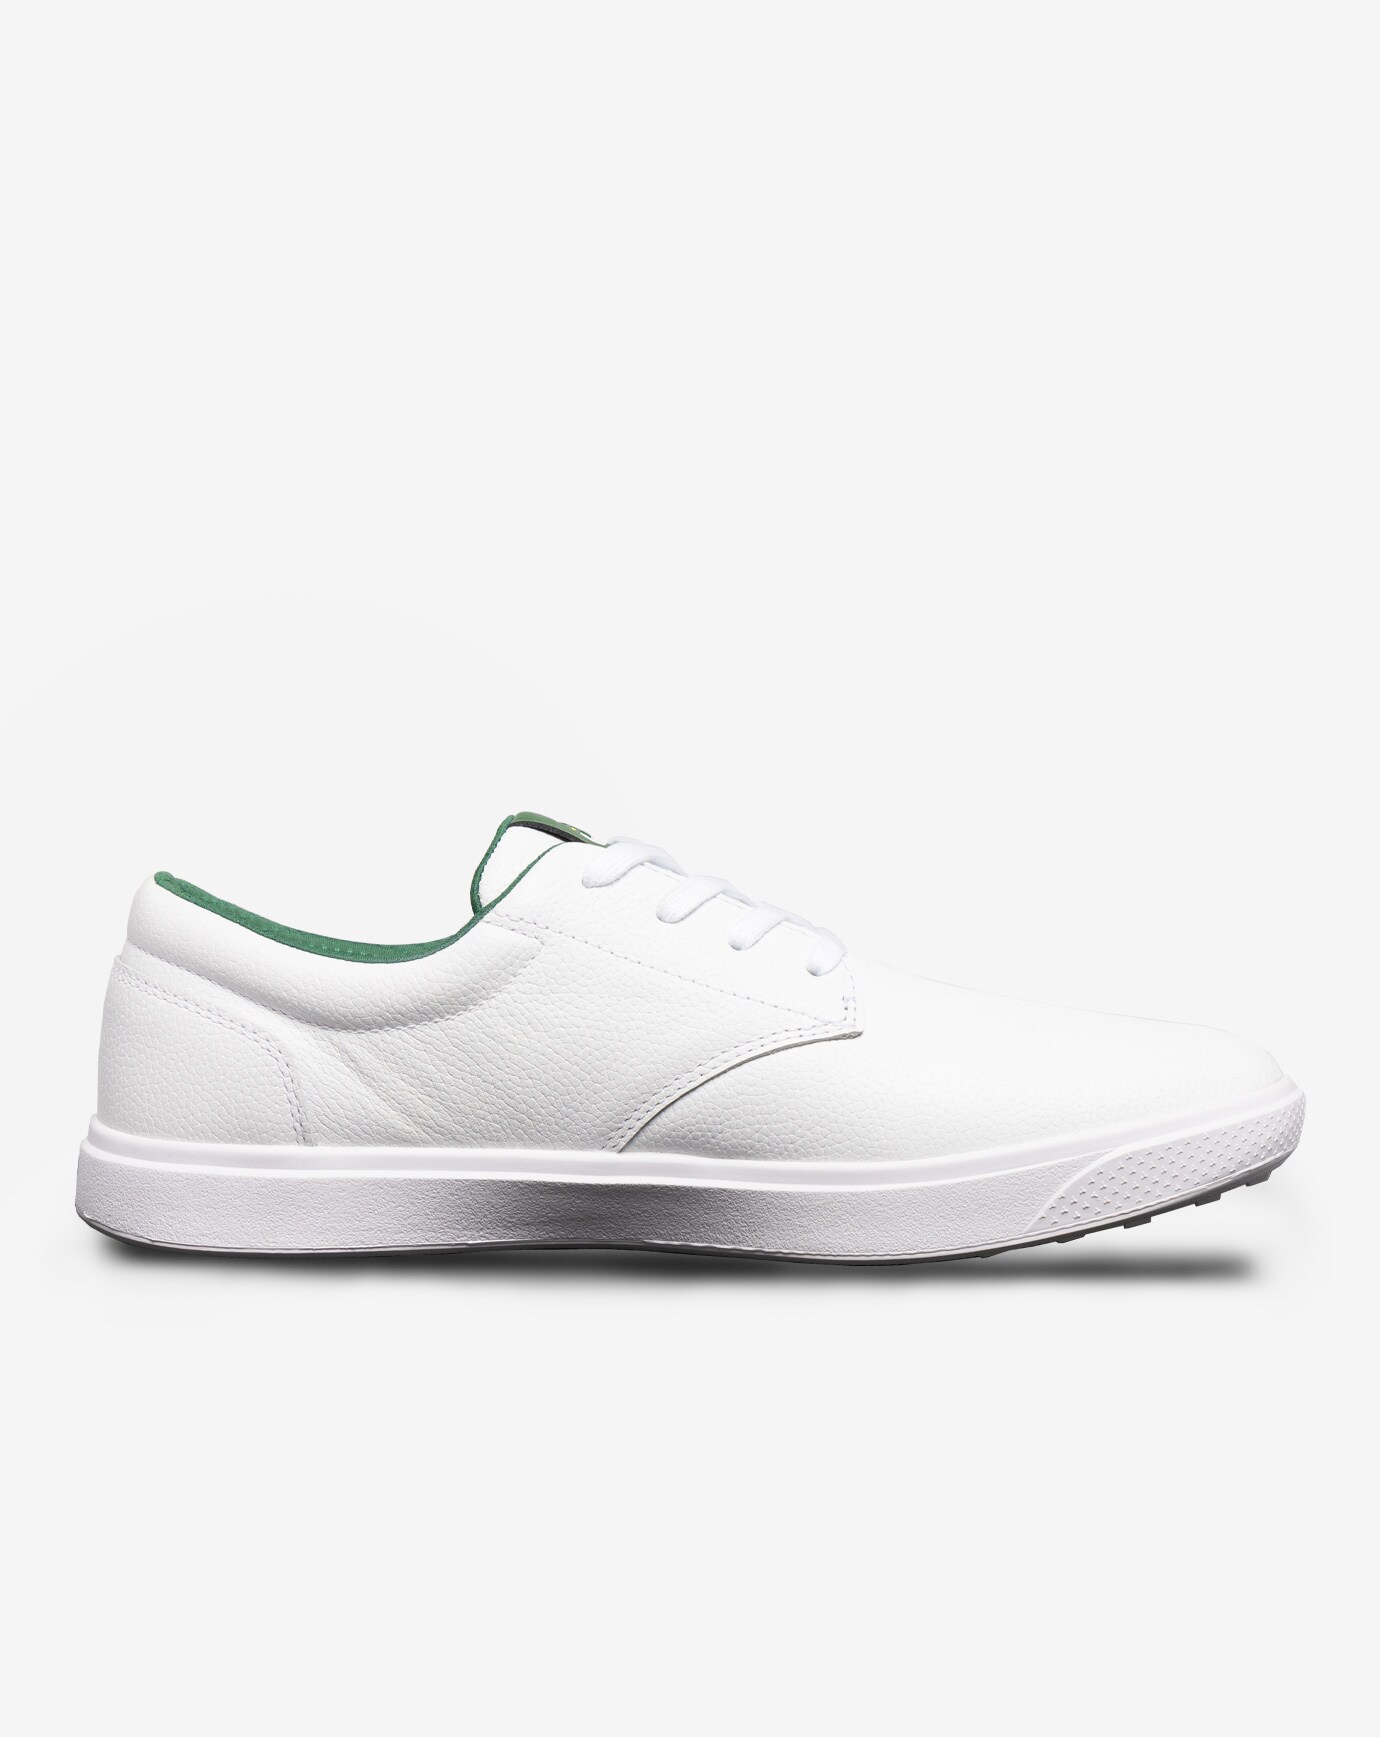 THE WILDCARD LEATHER SPIKELESS GOLF SHOE Image 3